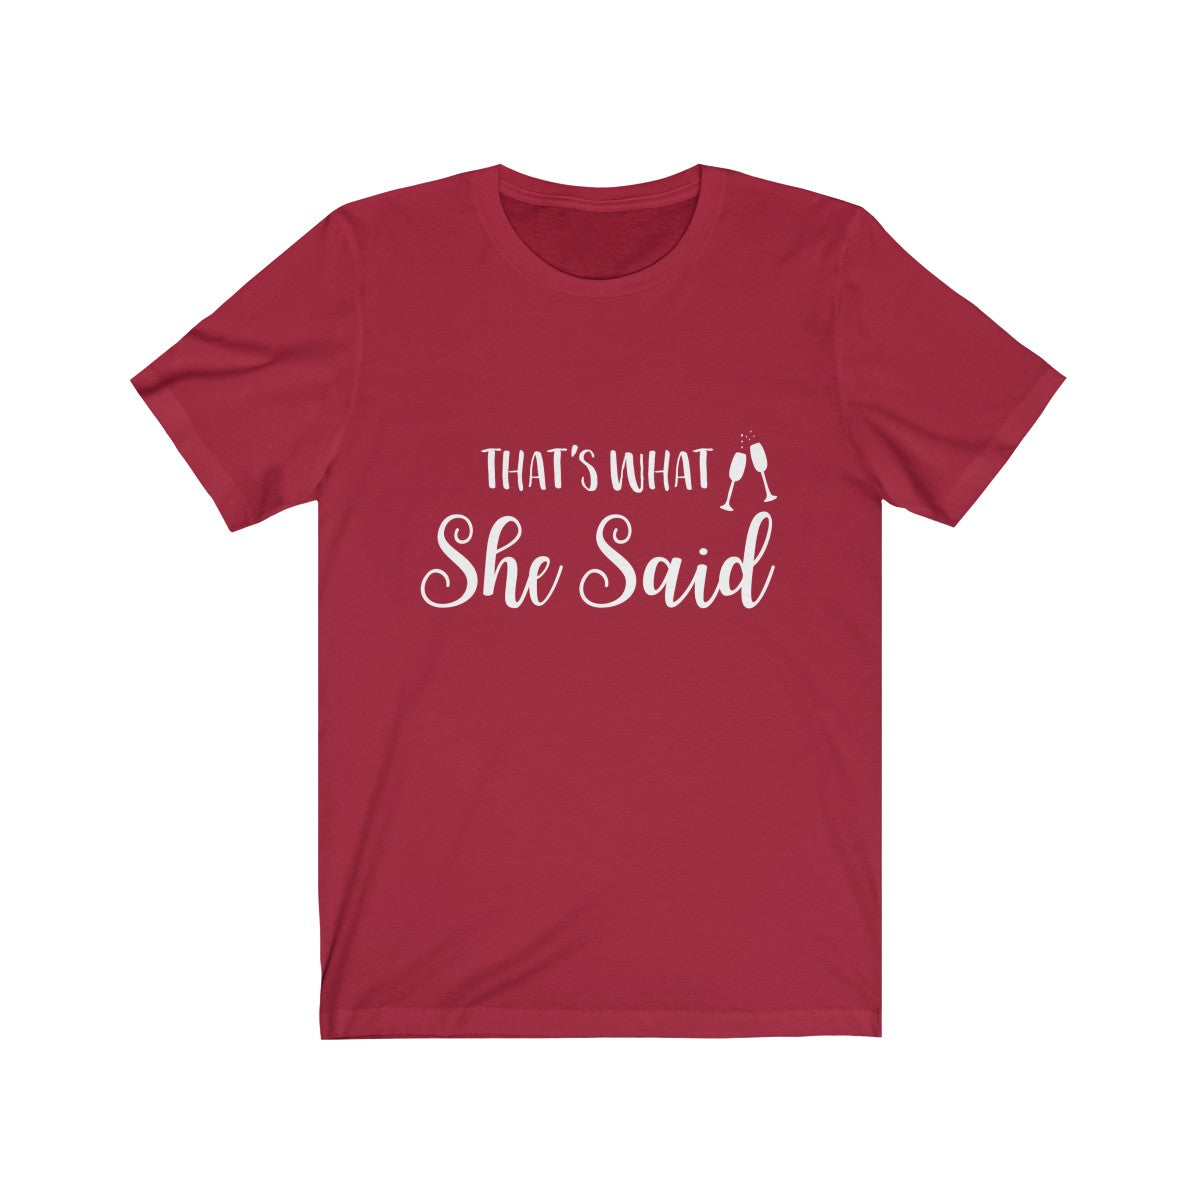 Tee thats what she said white lettering - elrileygifts